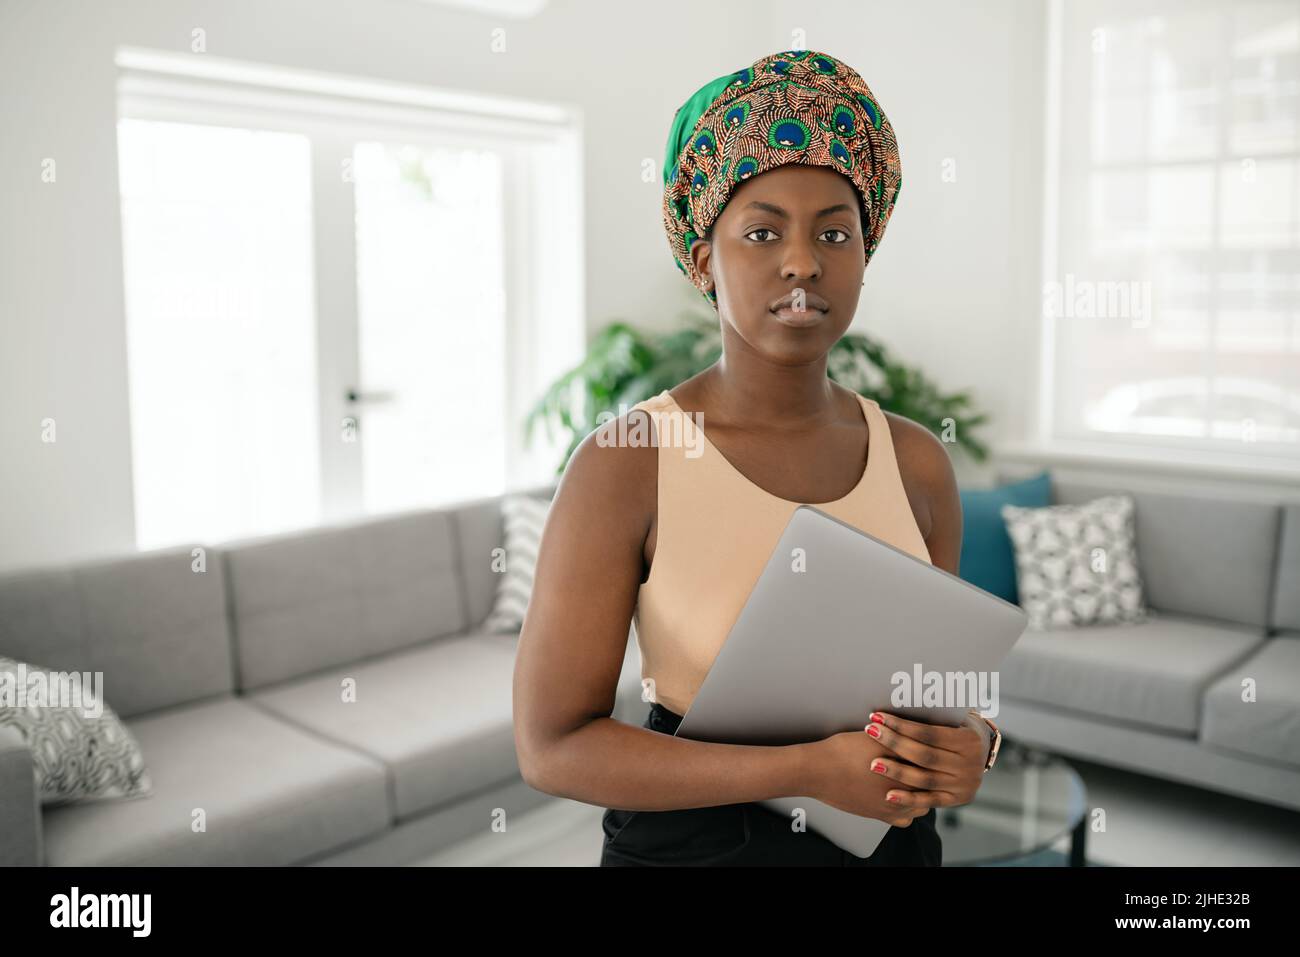 Portrait of beautiful smiling Black African woman standing in modern home with laptop in hand, wearing a traditional headscarf Stock Photo